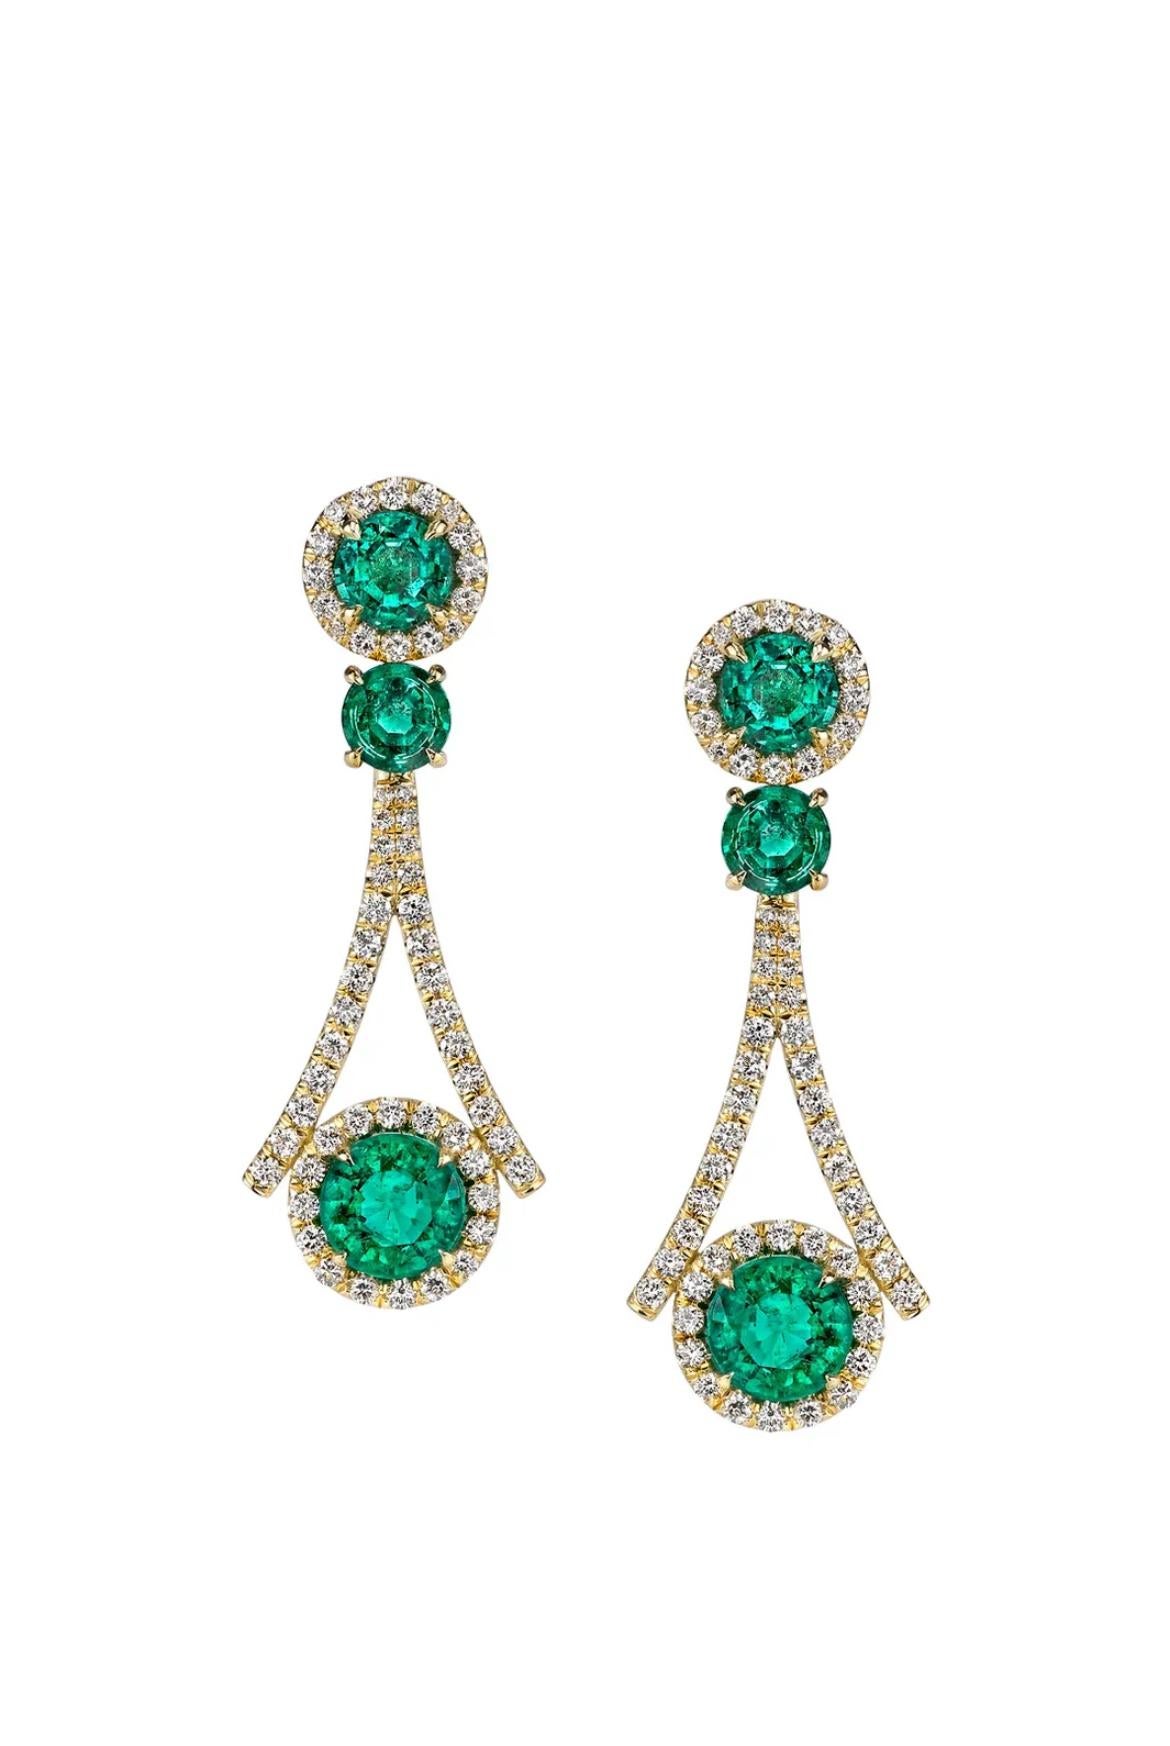 A sumptuous design crafted of 18K yellow gold completes these glittering forest green glowing earrings. Featuring 7.19 carats of perfectly intense Zambian Emeralds, embedded by 1.89 carats of white glistening diamonds.